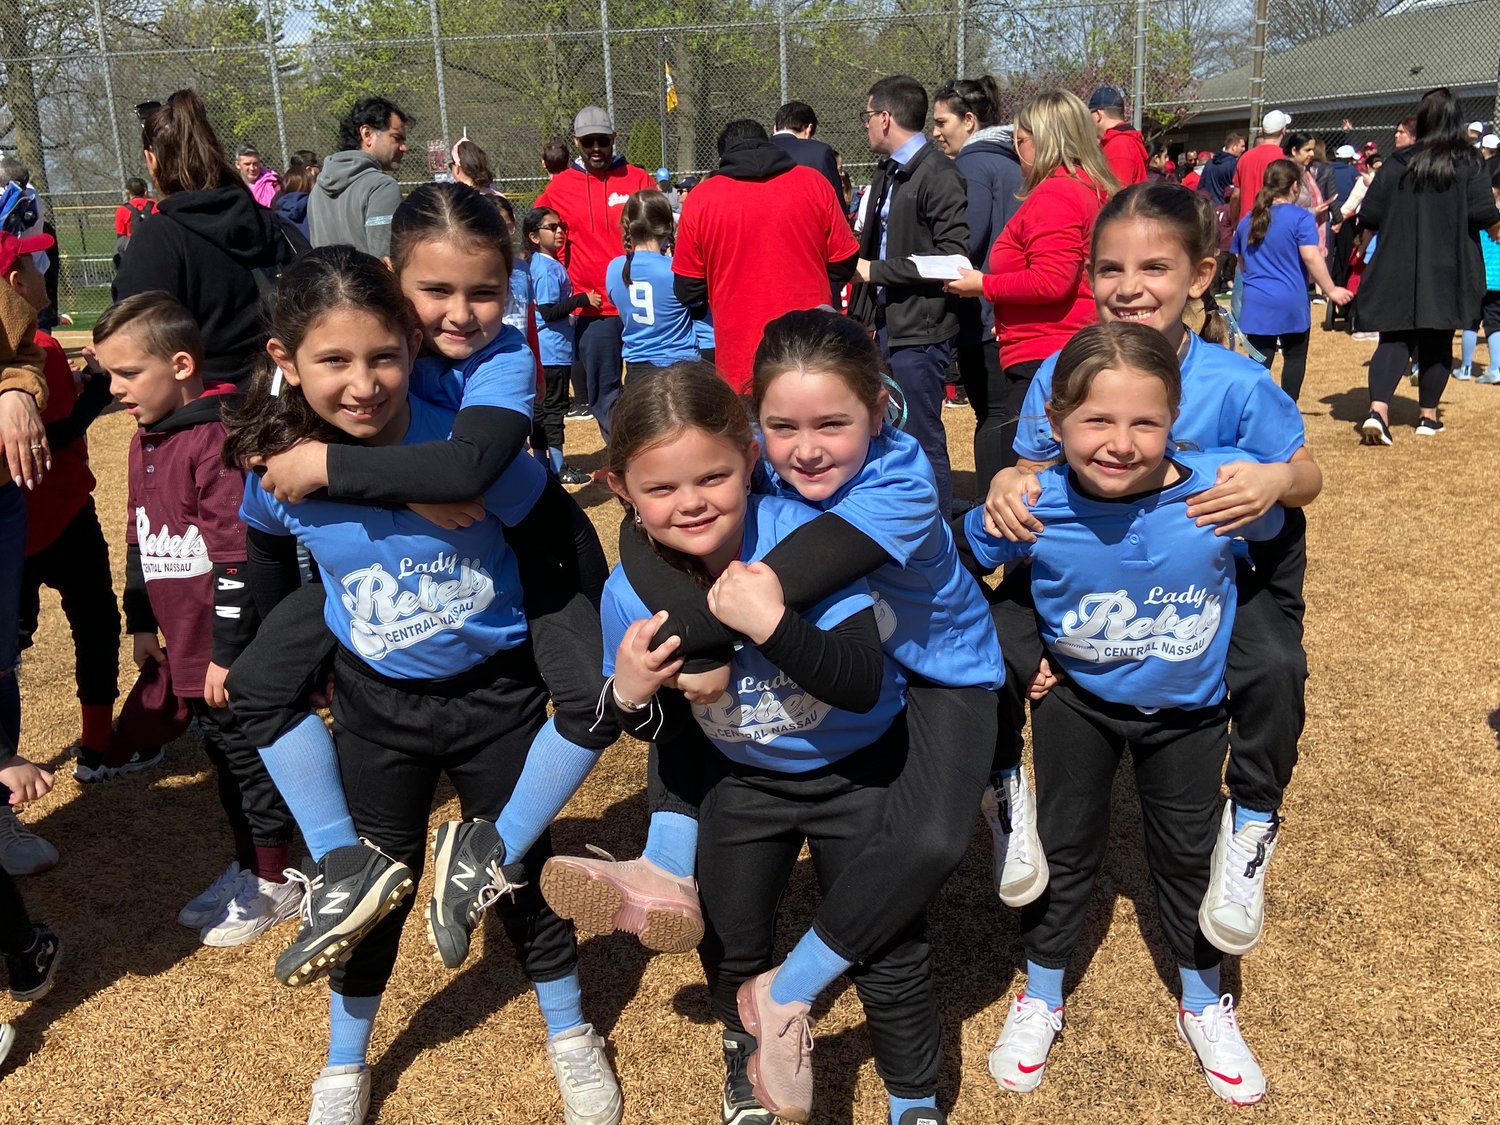 From left, Alessia Buffalino, Kailey Resende, Ava Burressi, Sofia Trotta, Noelle Lodati and Samantha Kellerman were excited to start the season together.